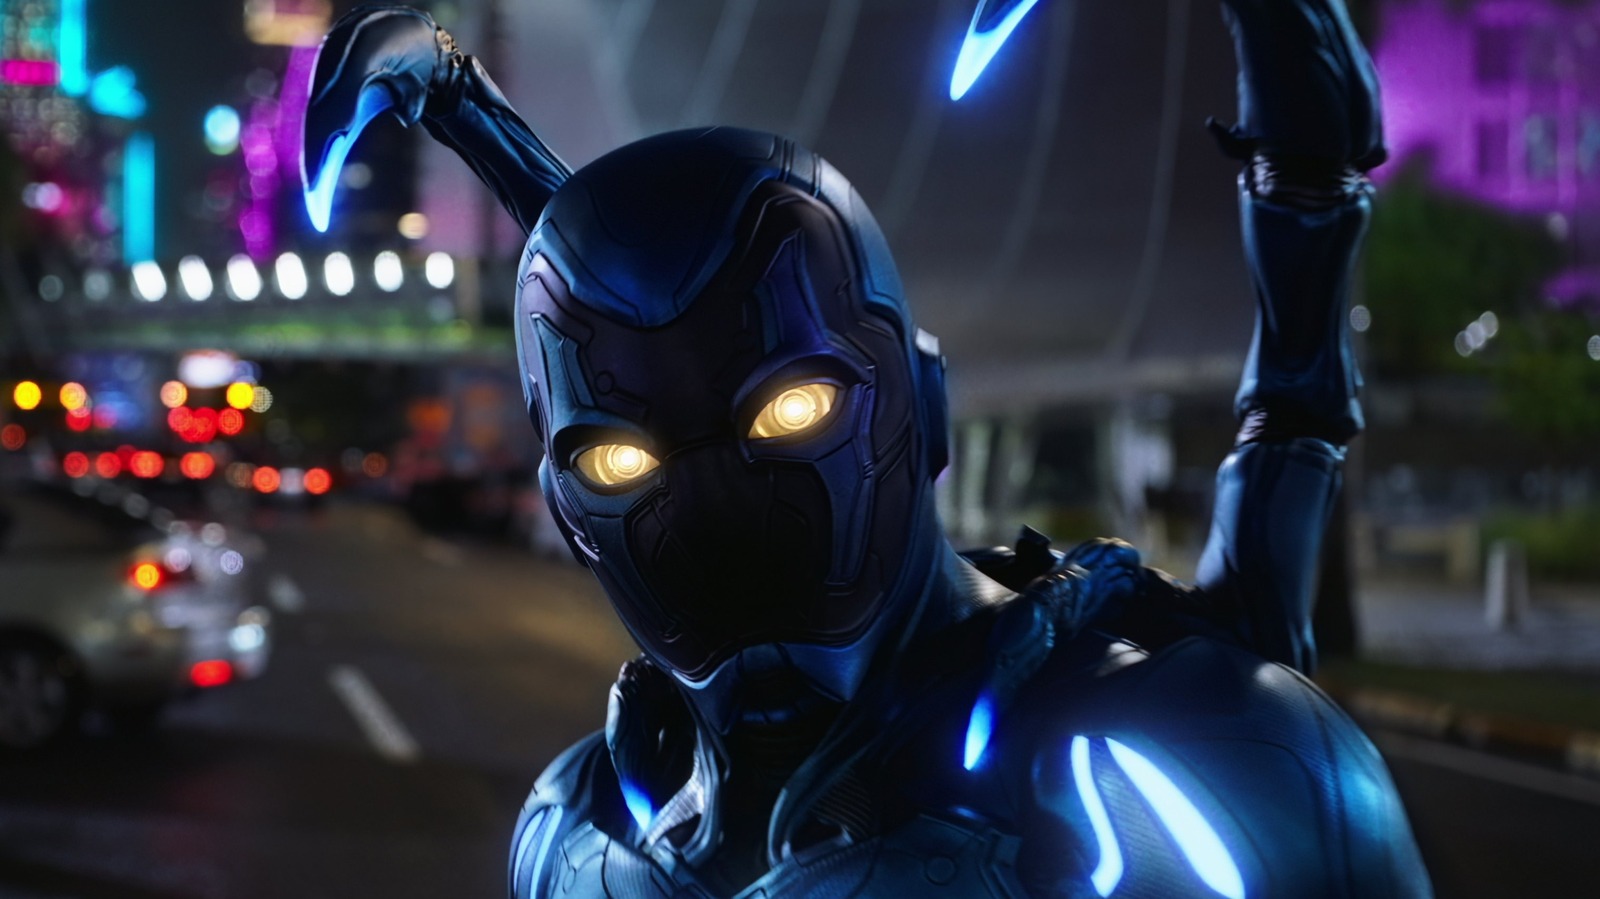 make sure u go watch blue beetle and support the cast and crew